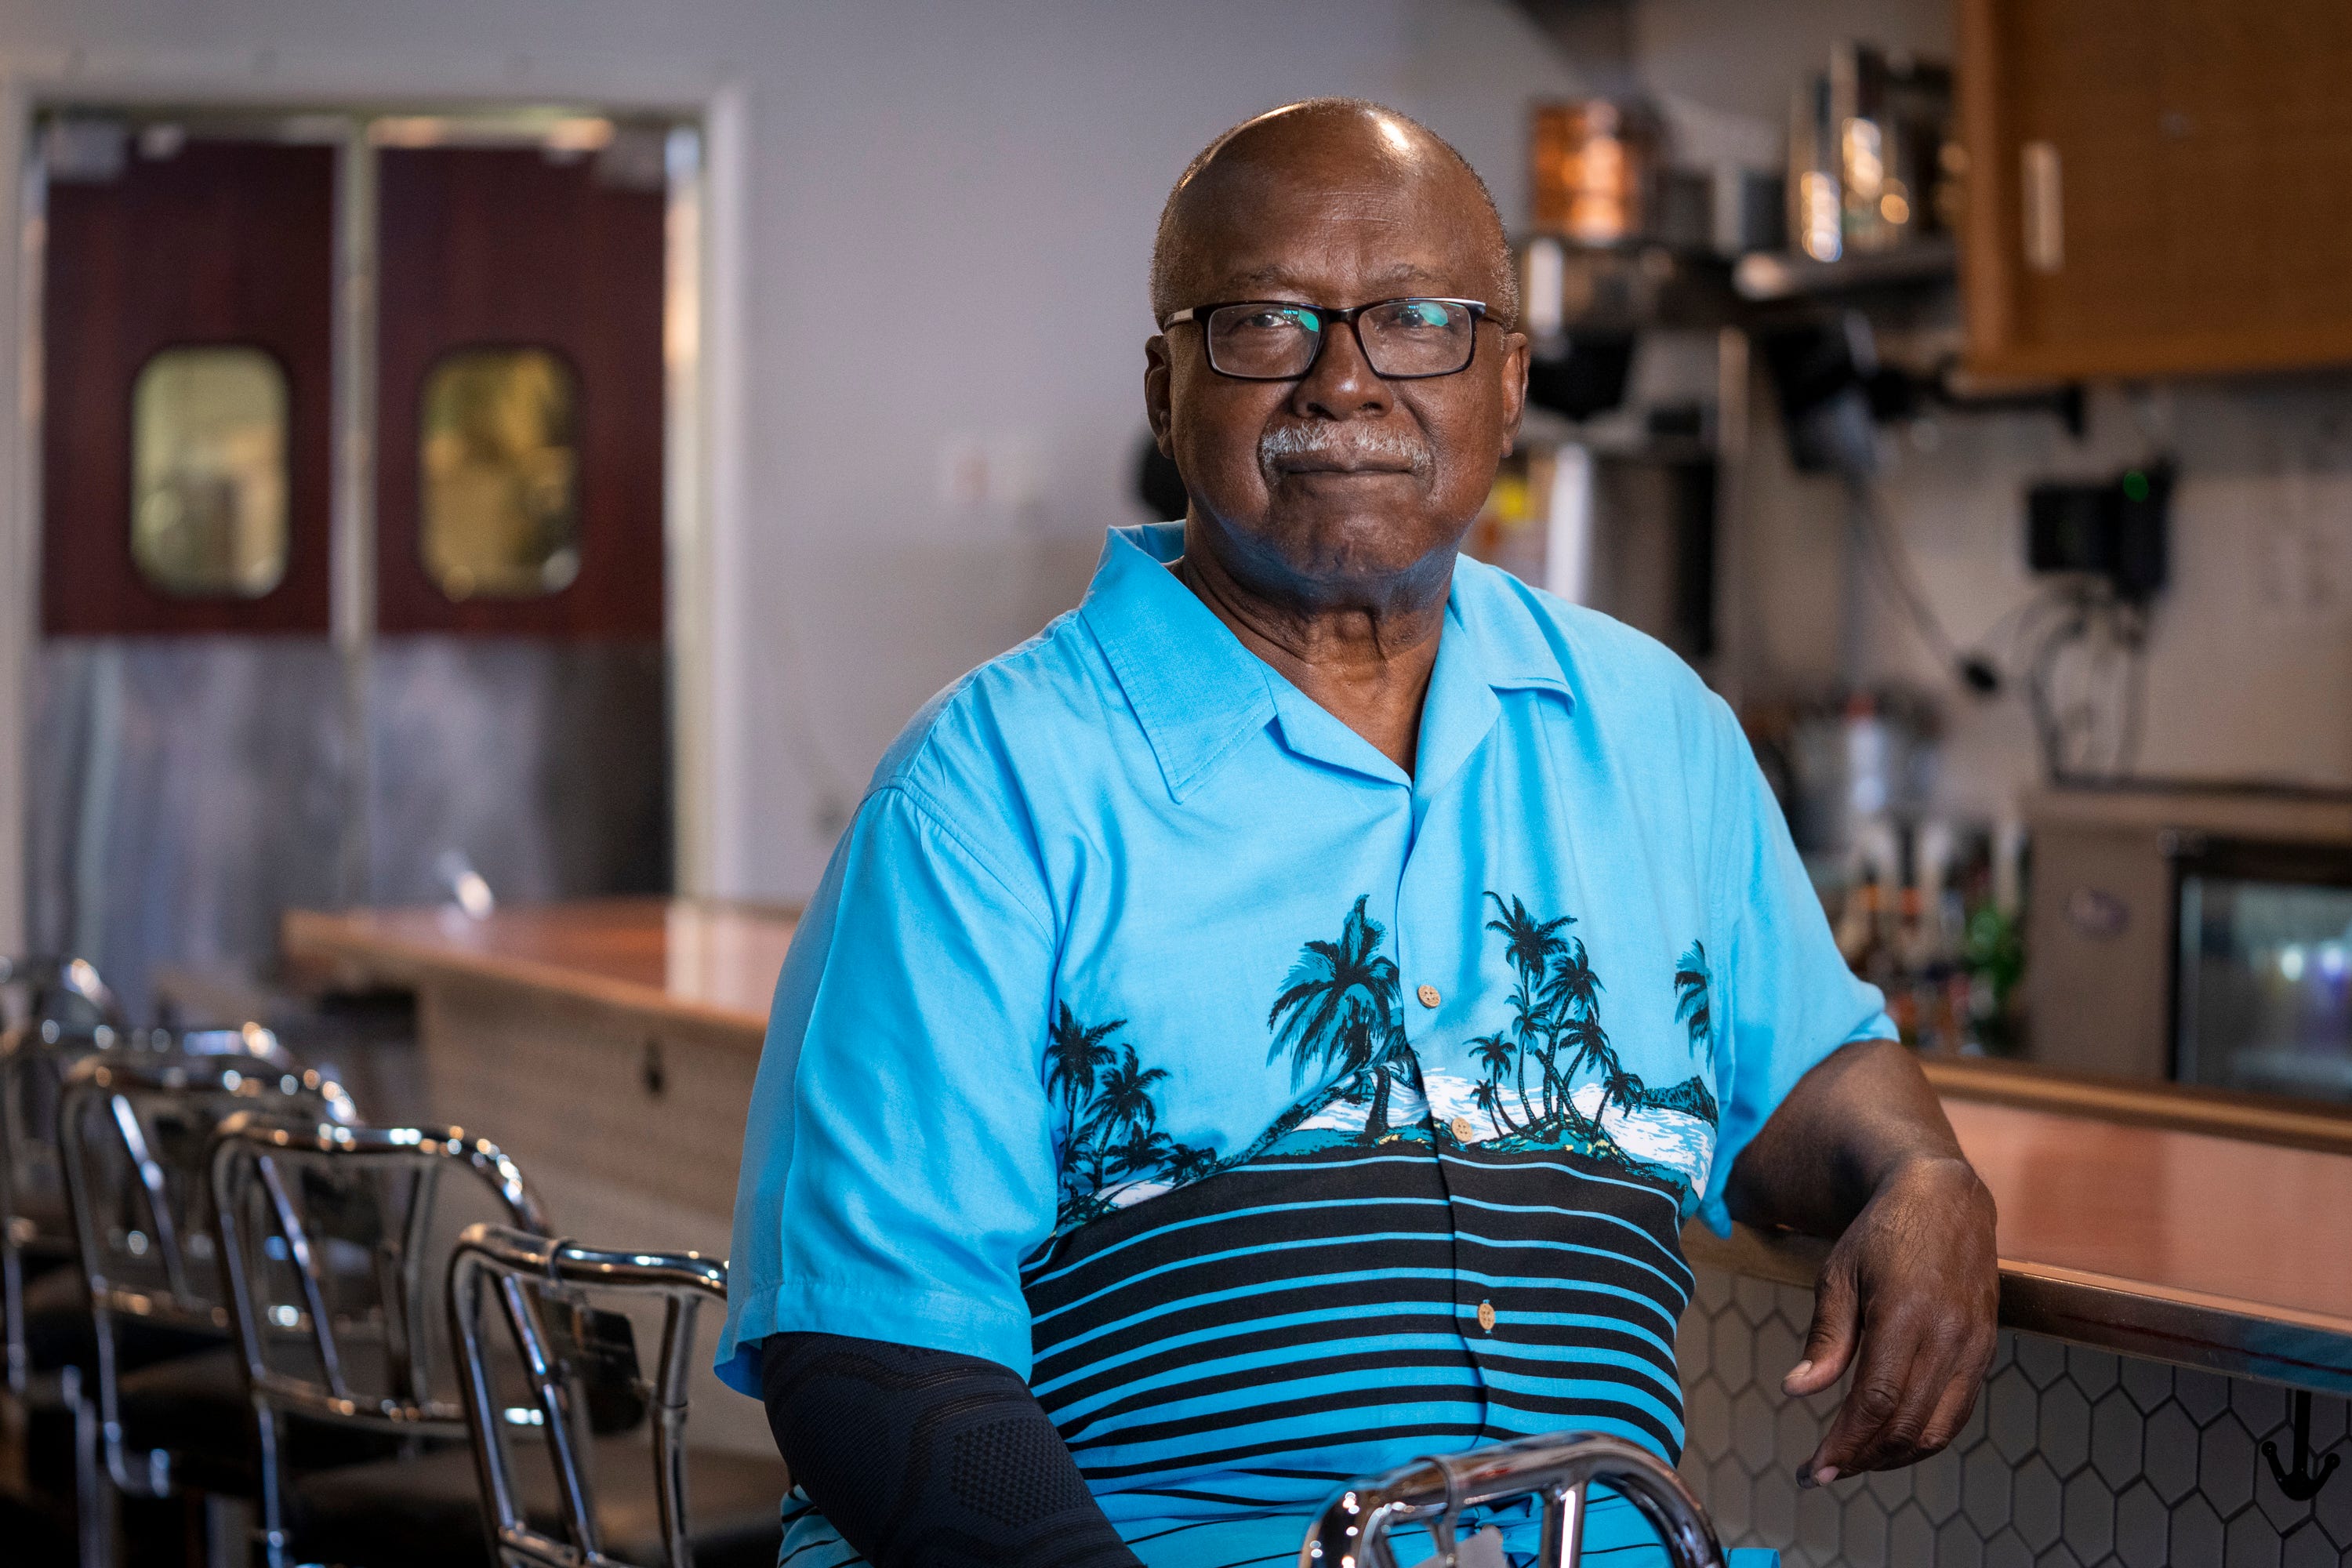 David Williamson, one of the Friendship Nine, sits for a portrait at the original McCrory's lunch counter, restored and preserved by the owners of Kounter, in Rock Hill, S.C., on Aug. 12, 2021.